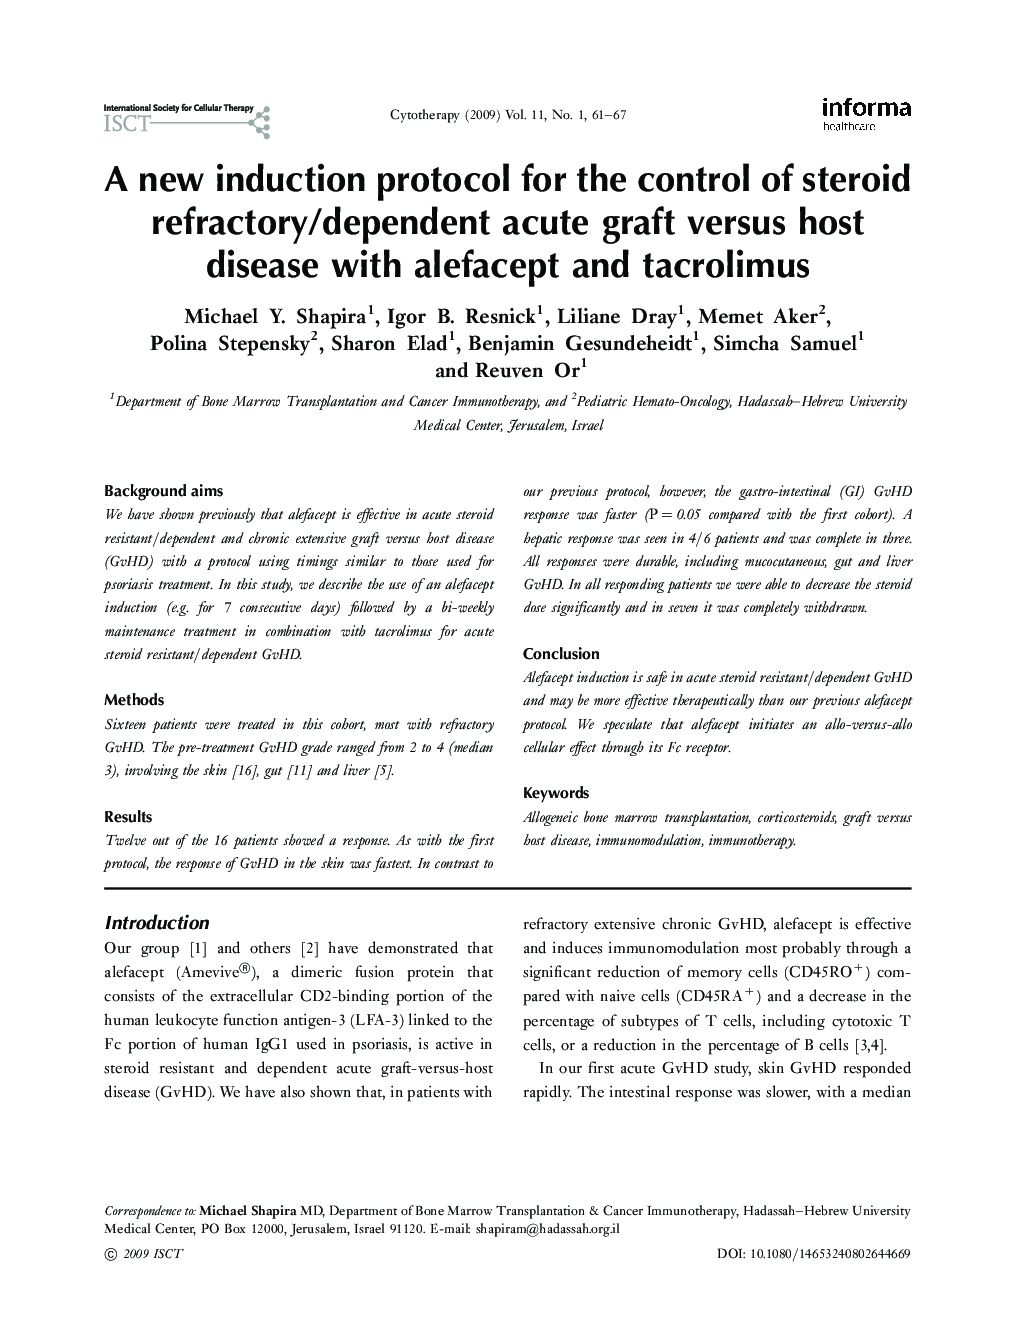 A new induction protocol for the control of steroid refractory/dependent acute graft versus host disease with alefacept and tacrolimus